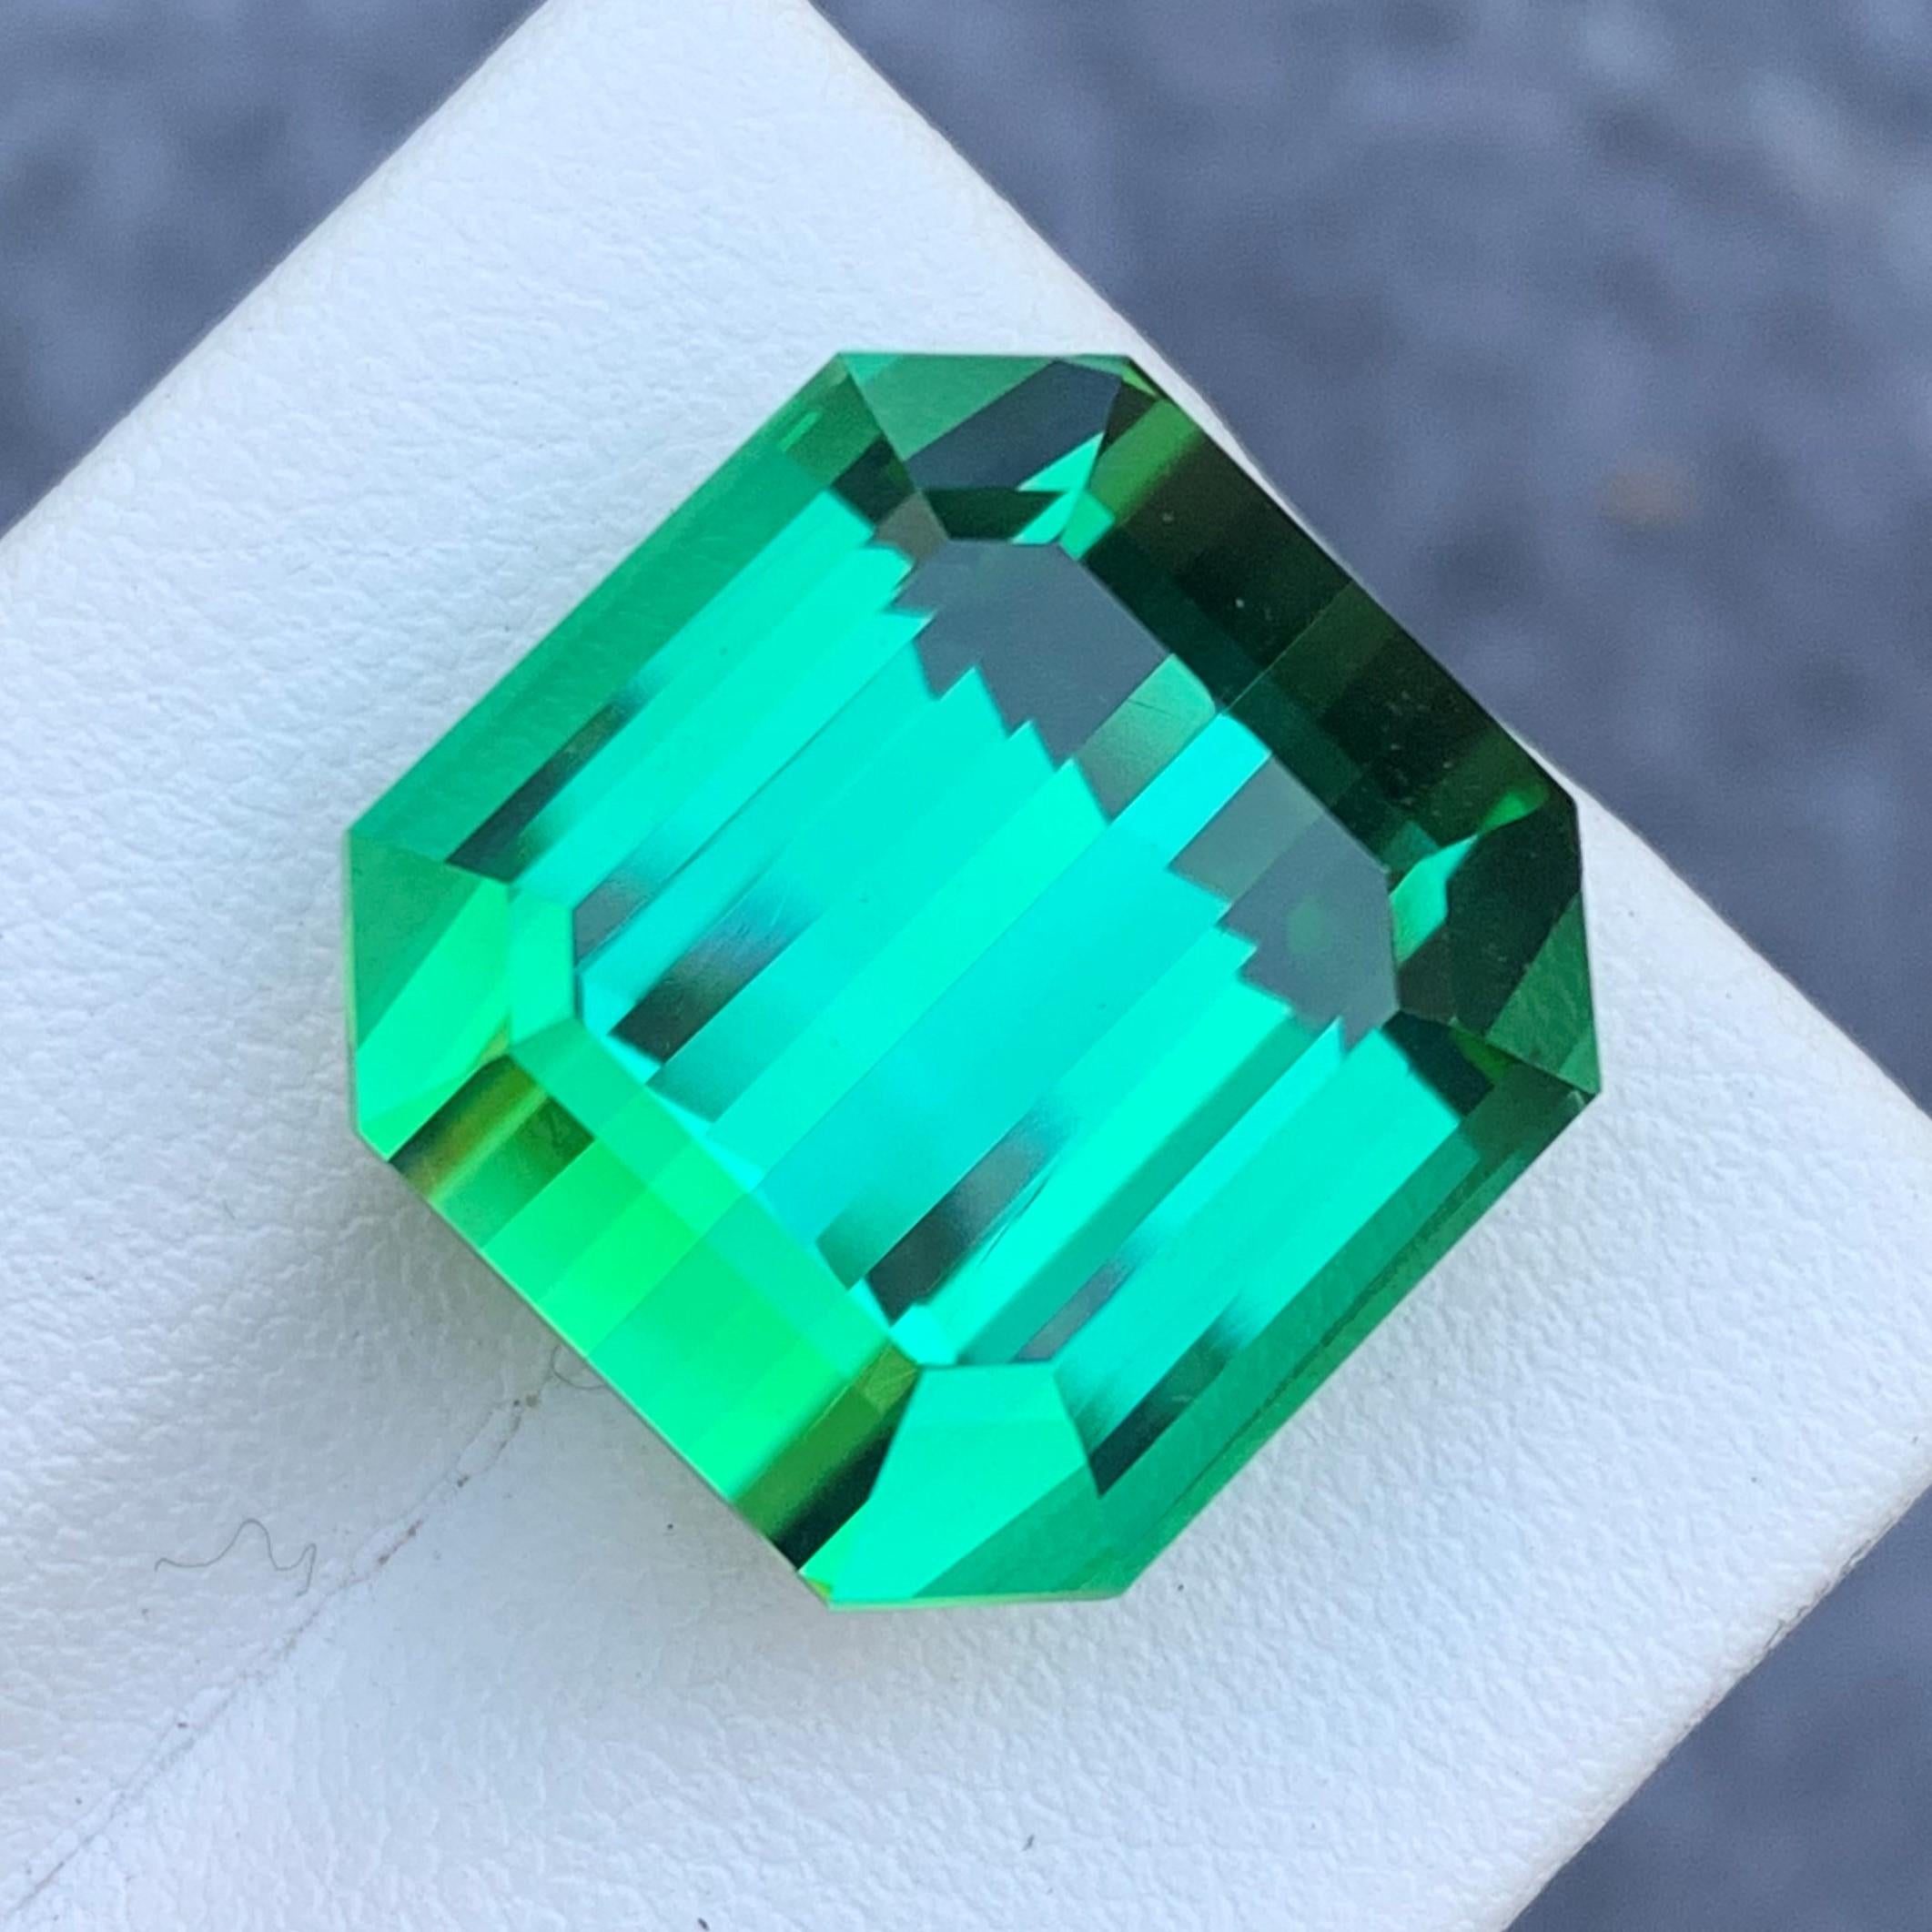 Gemstone Type : Tourmaline
Weight : 31.15 Carats
Dimensions : 17x16.6x12.9 Mm
Origin : Kunar Afghanistan
Clarity : Loupe Clean
Shape: Emerald
Color: Lagoon Green 
Certificate: On Demand
Basically, mint tourmalines are tourmalines with pastel hues of